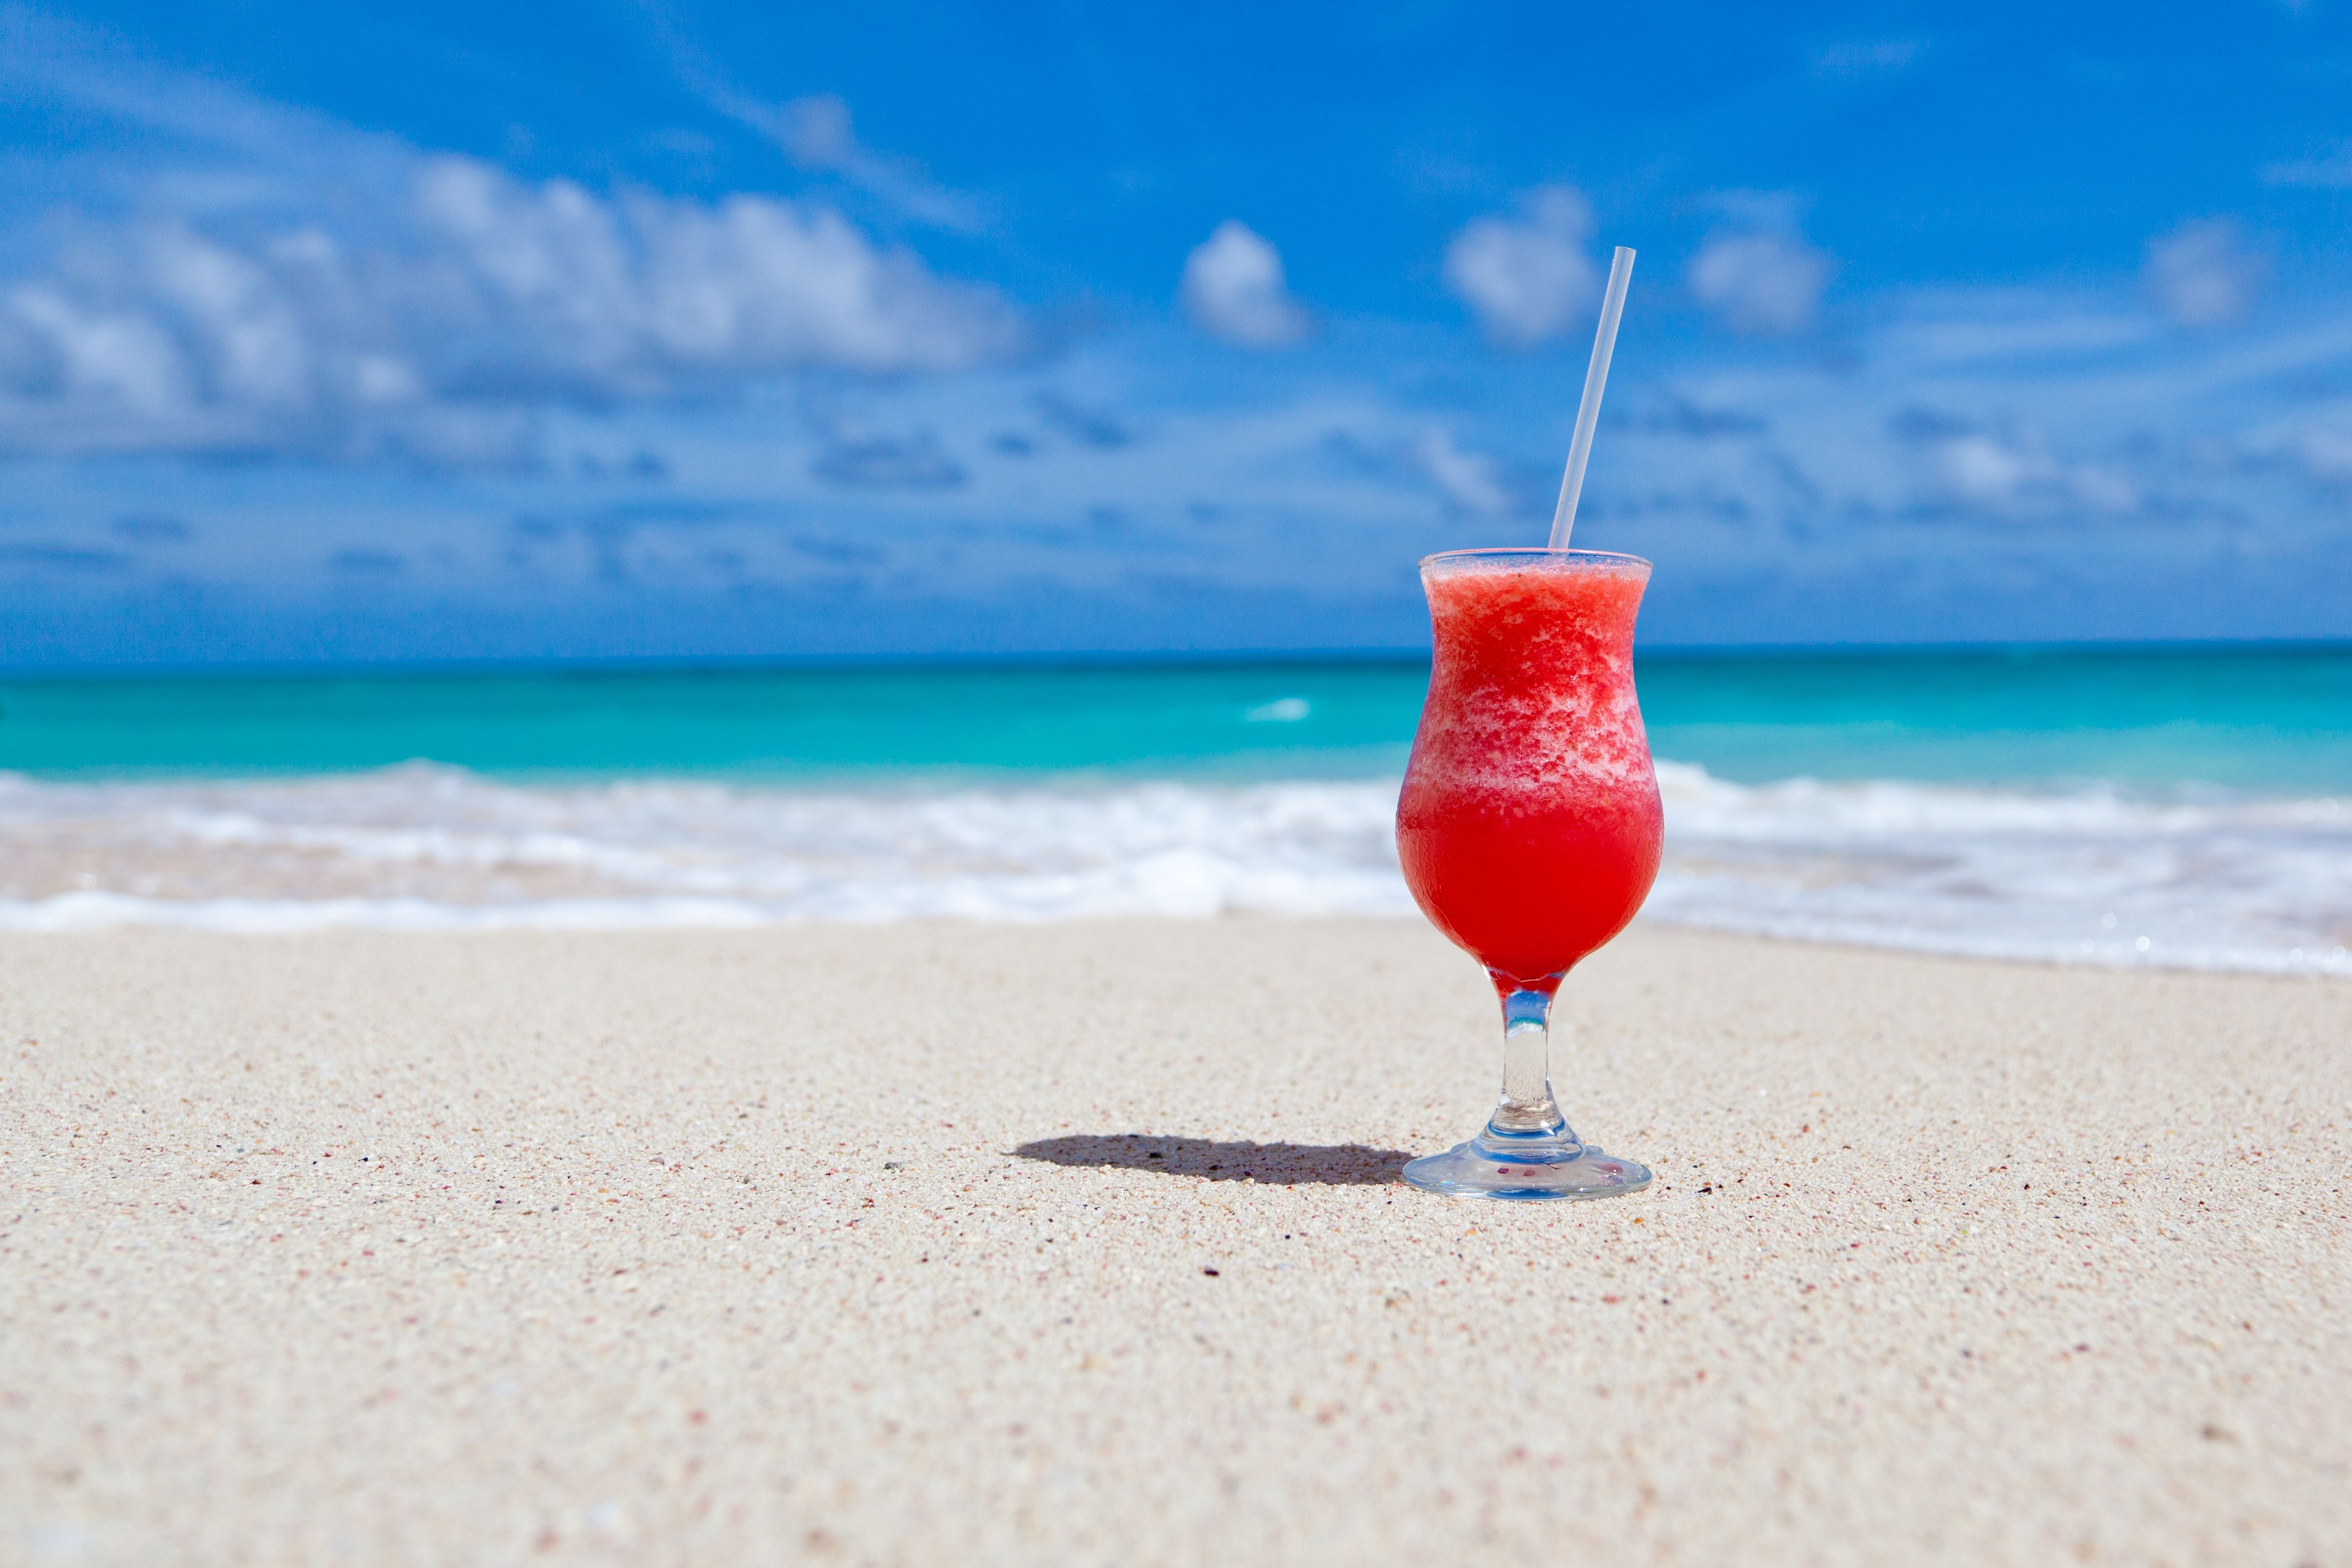 Ice cold red beverage on a caribbean beach 4k Ultra HD Wallpapers